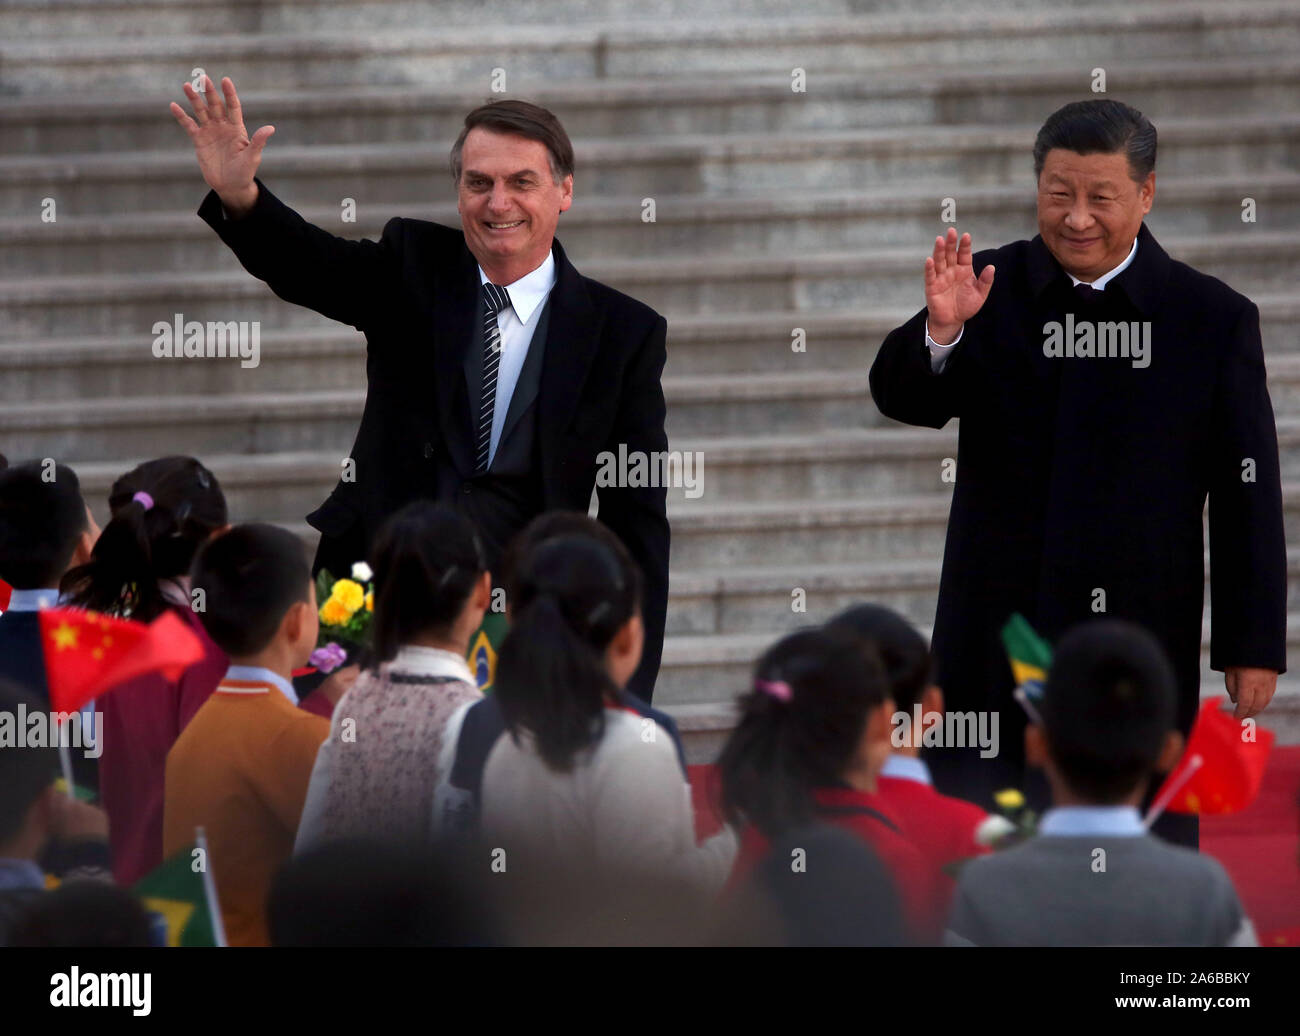 Beijing, China. 25th Oct, 2019. Brazilian President Jair Bolsonaro (R) is escorted by Chinese President Xi Jinping during a welcoming ceremony at the Great Hall of the People in Beijing on Friday, October 25, 2019. Bolsonaro told a forum that China and Brazil 'were born to walk together' and the two governments are 'completely aligned in a way that reaches beyond our commercial and business relationship.' Photo by Stephen Shaver/UPI Credit: UPI/Alamy Live News Stock Photo